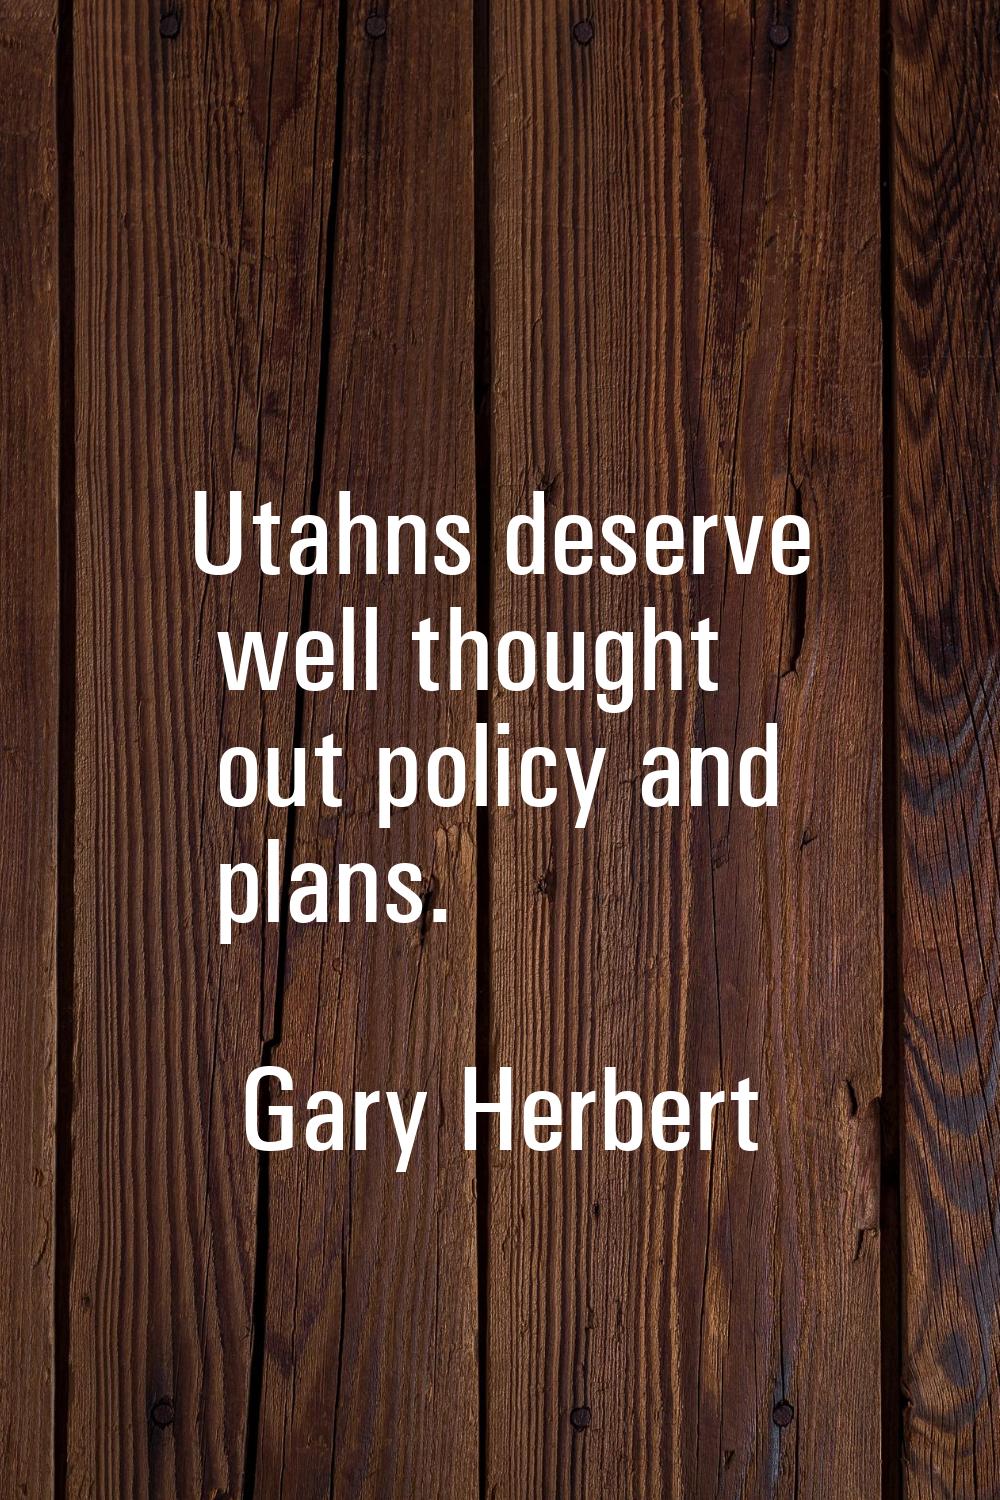 Utahns deserve well thought out policy and plans.